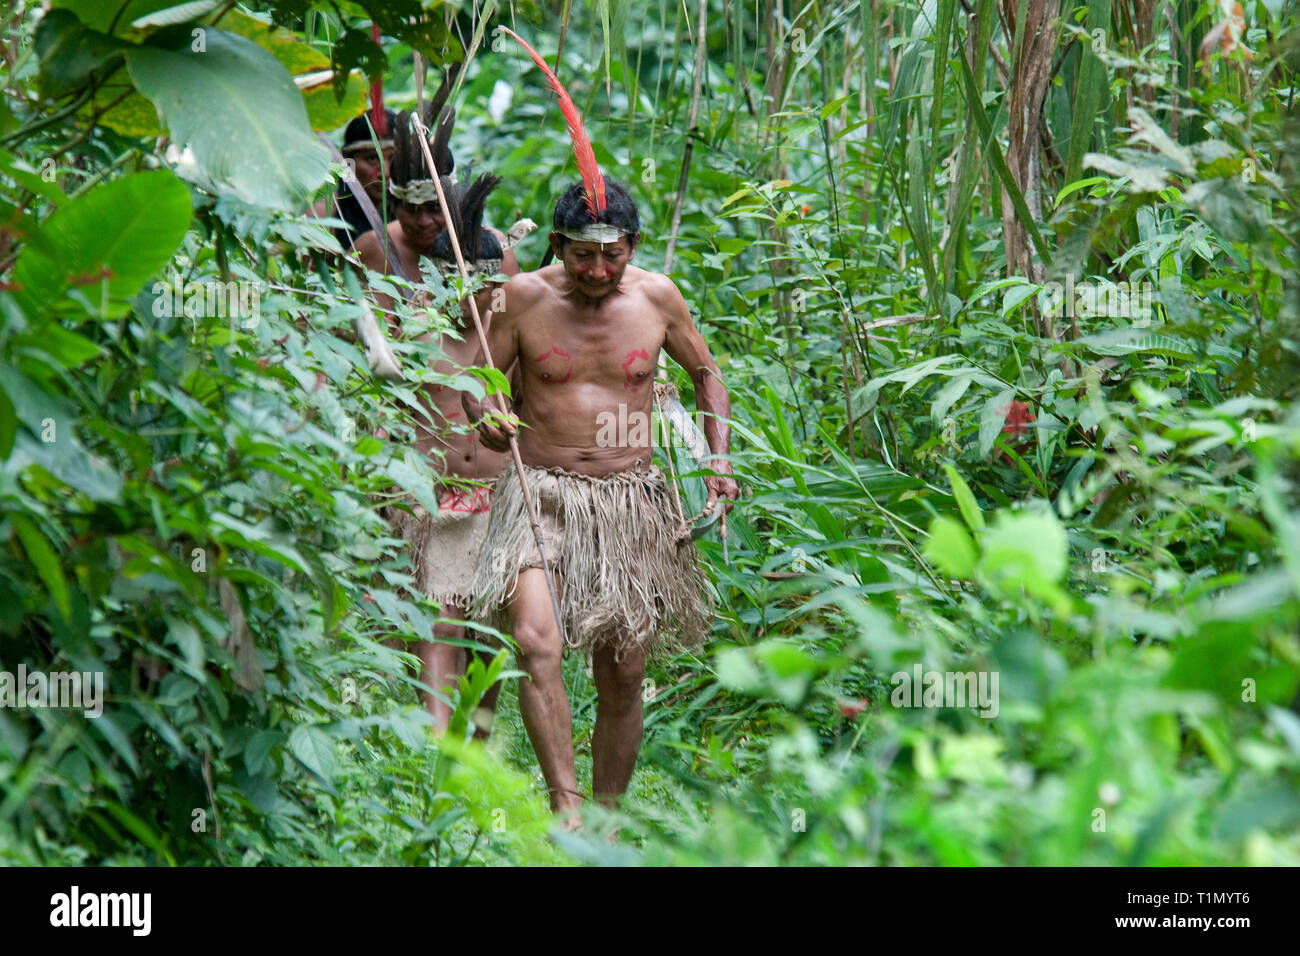 Maleku indians, native people which keeps their tradition up to today, Palente Magarita, Costa Rica Stock Photo